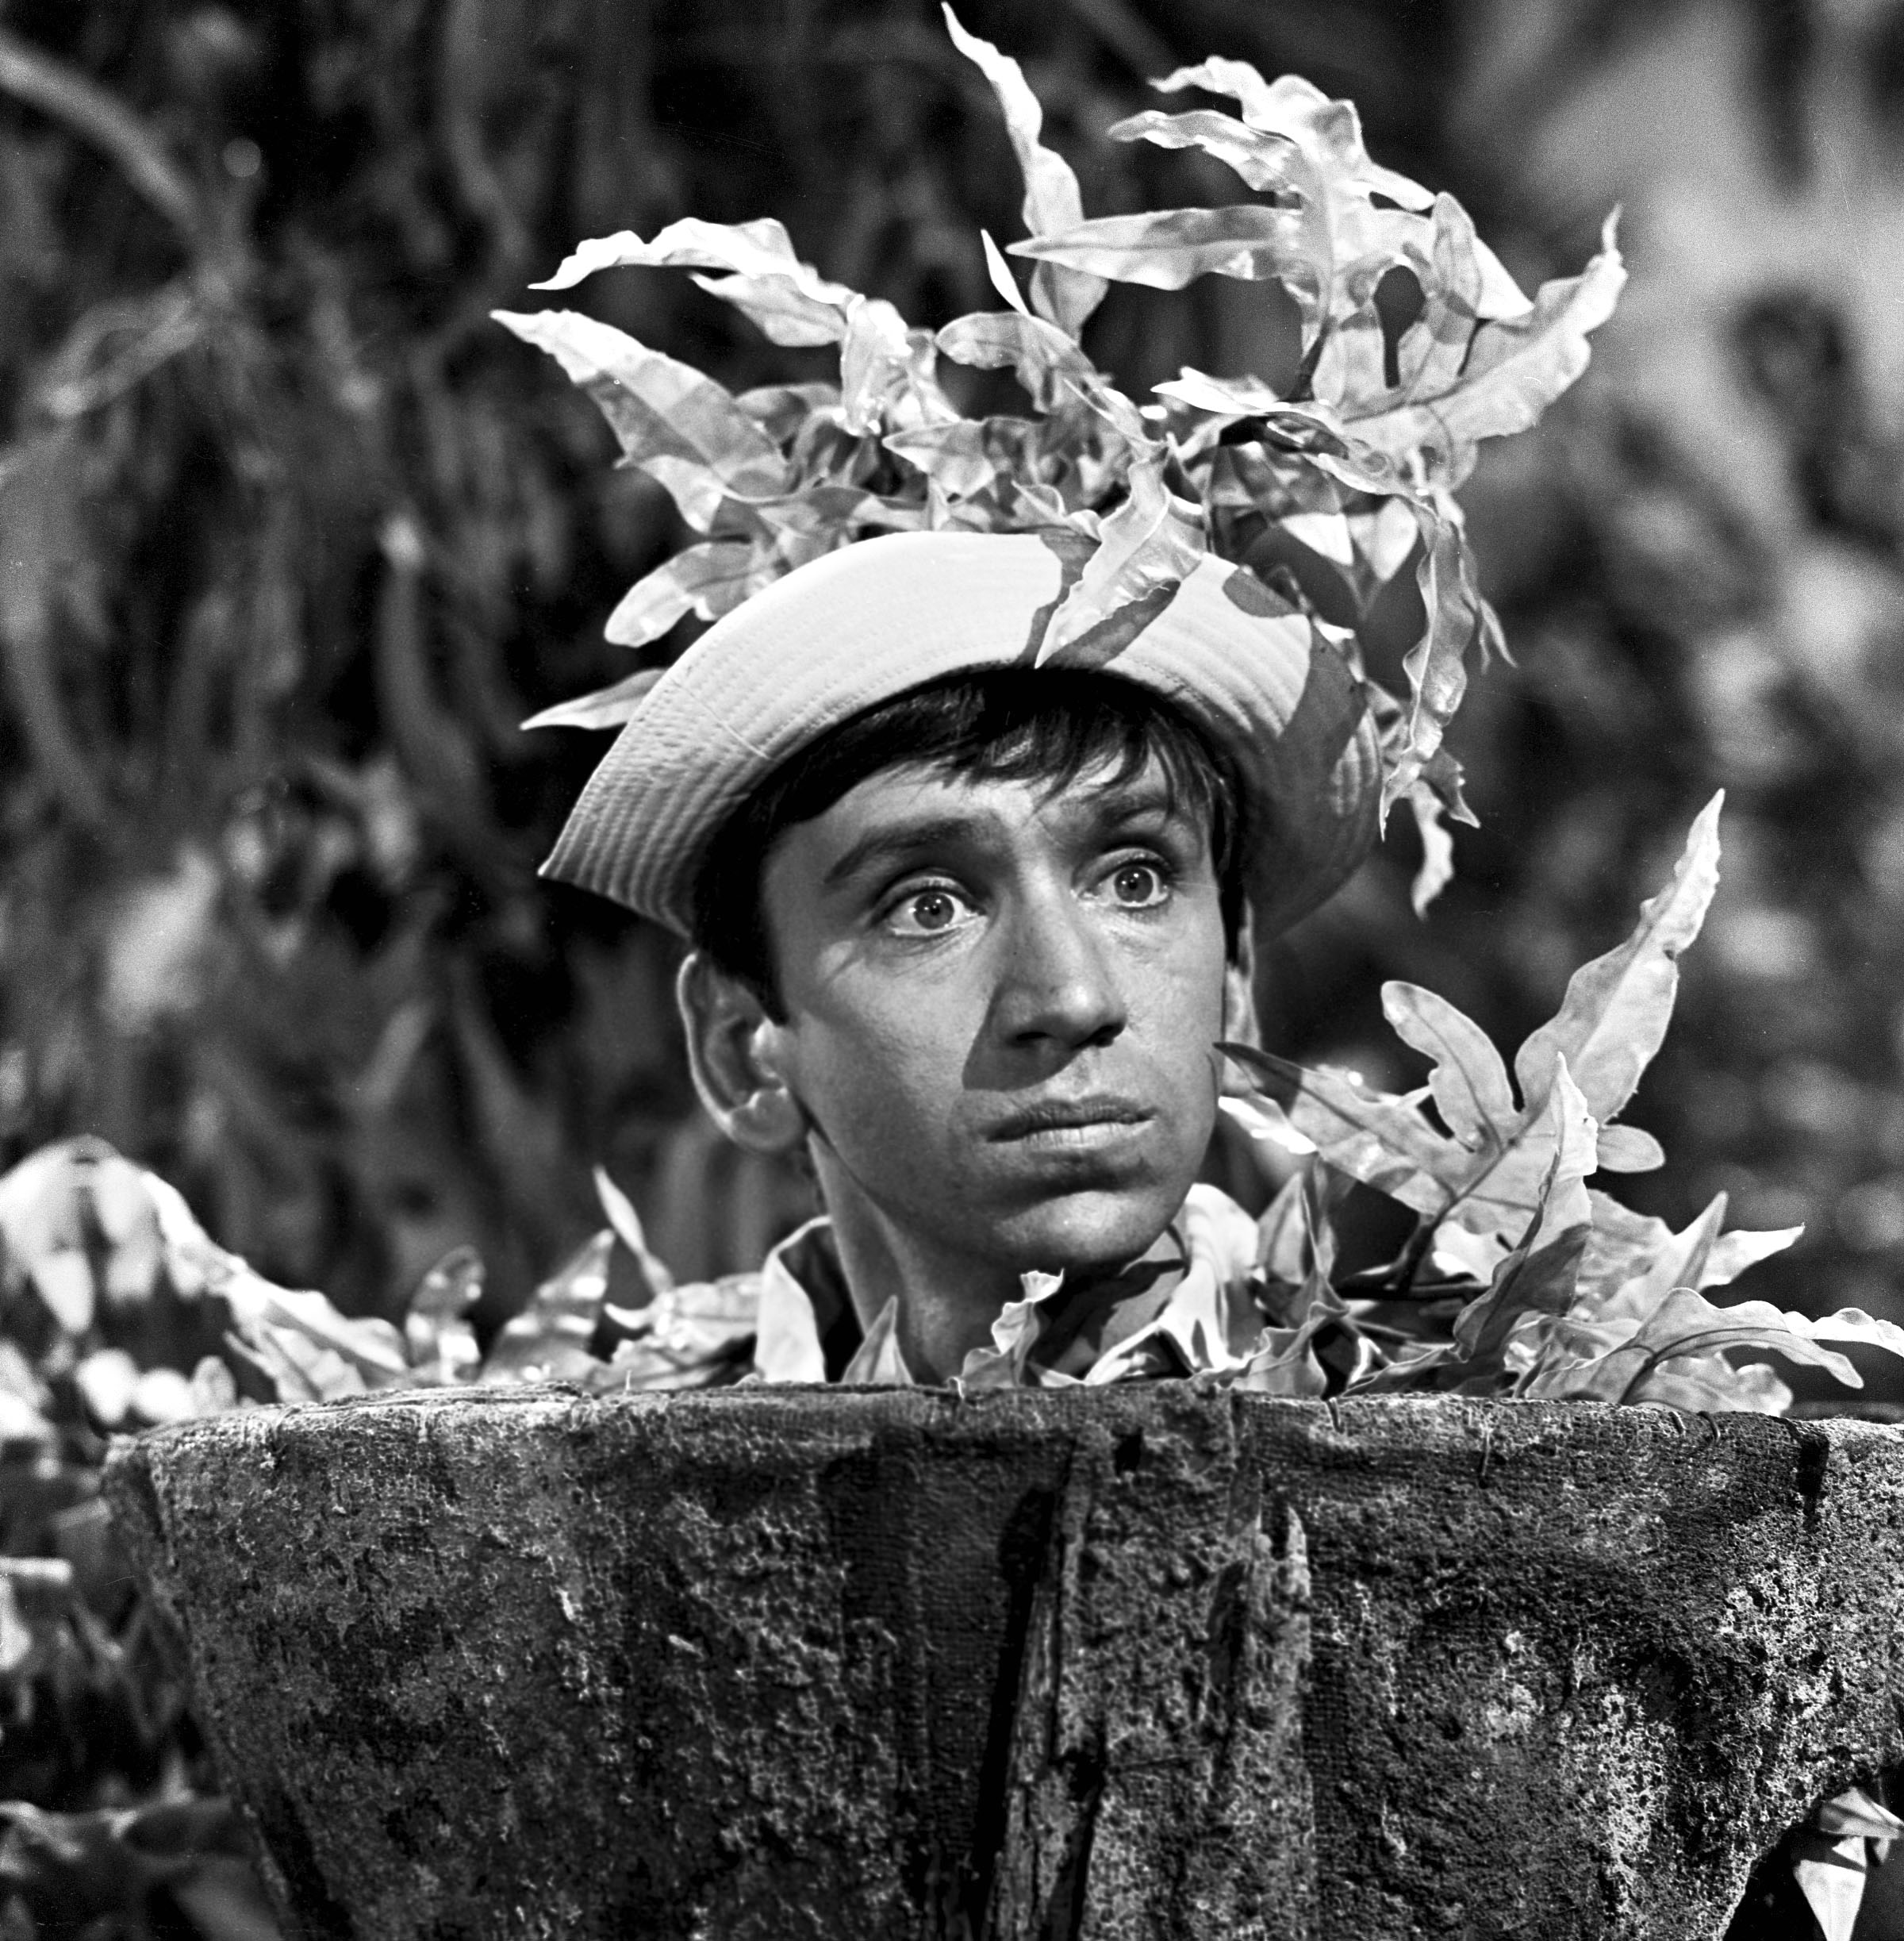 'Gilligan's Island' star Bob Denver as his character Gilligan hiding in a tree trunk and covered in leaves.